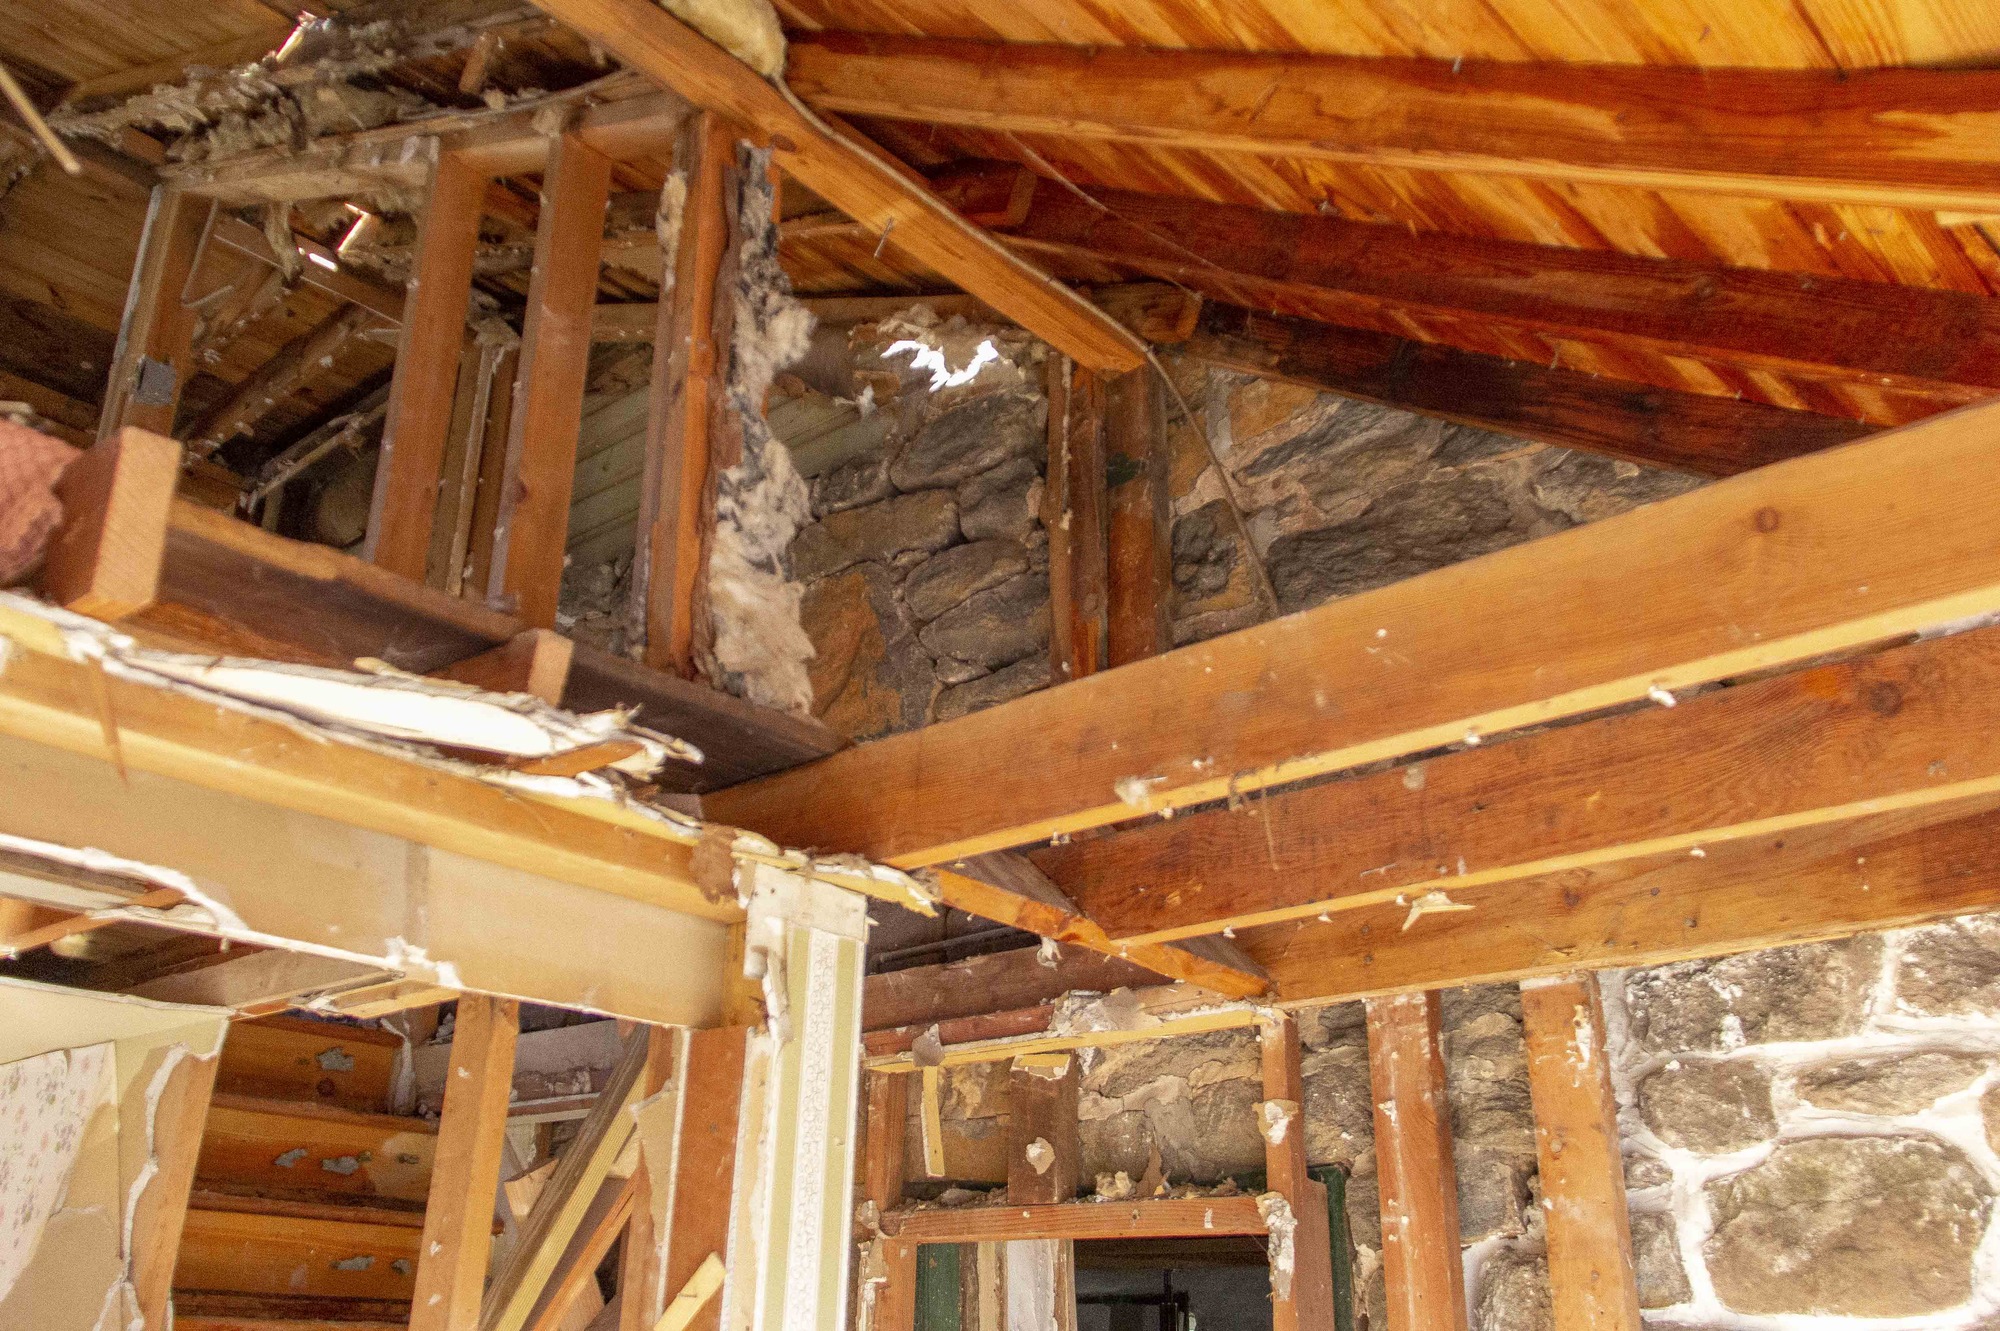 Preservationists continue to restore the inside of the house to its original structure through the selective demolition process. The wall and ceiling plaster has been removed to reveal the original stone structure of the house. 